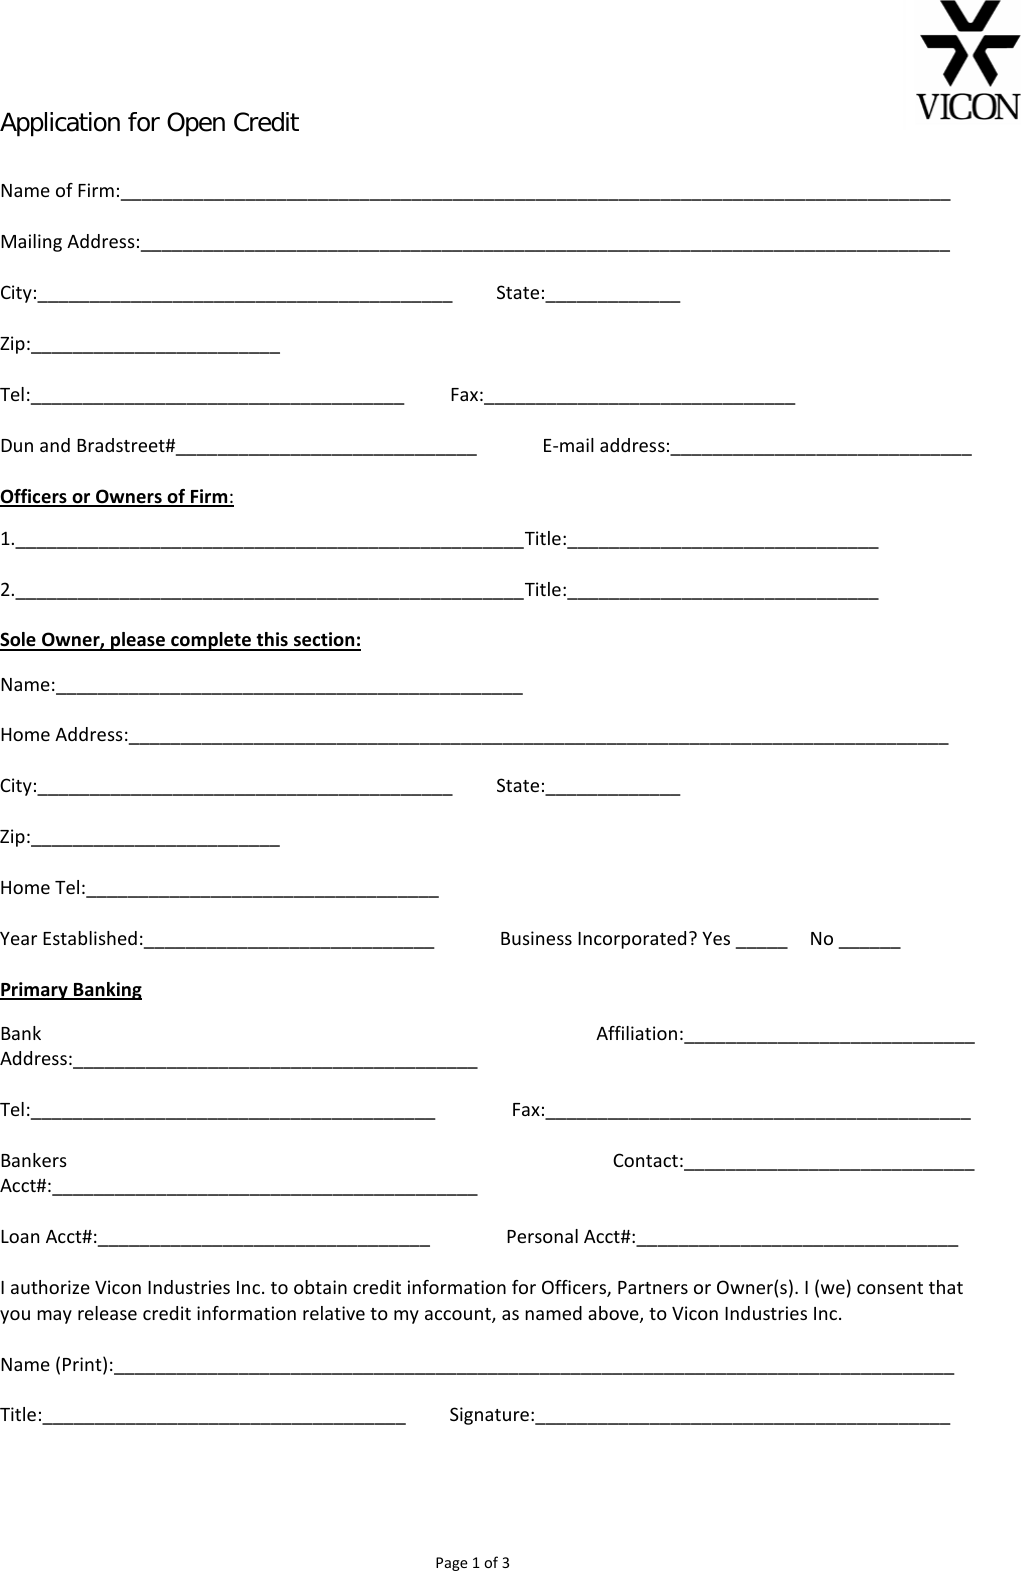 Page 1 of 3 - Security Newdealercreditapplicationform User Manual New Dealer Credit Application Form